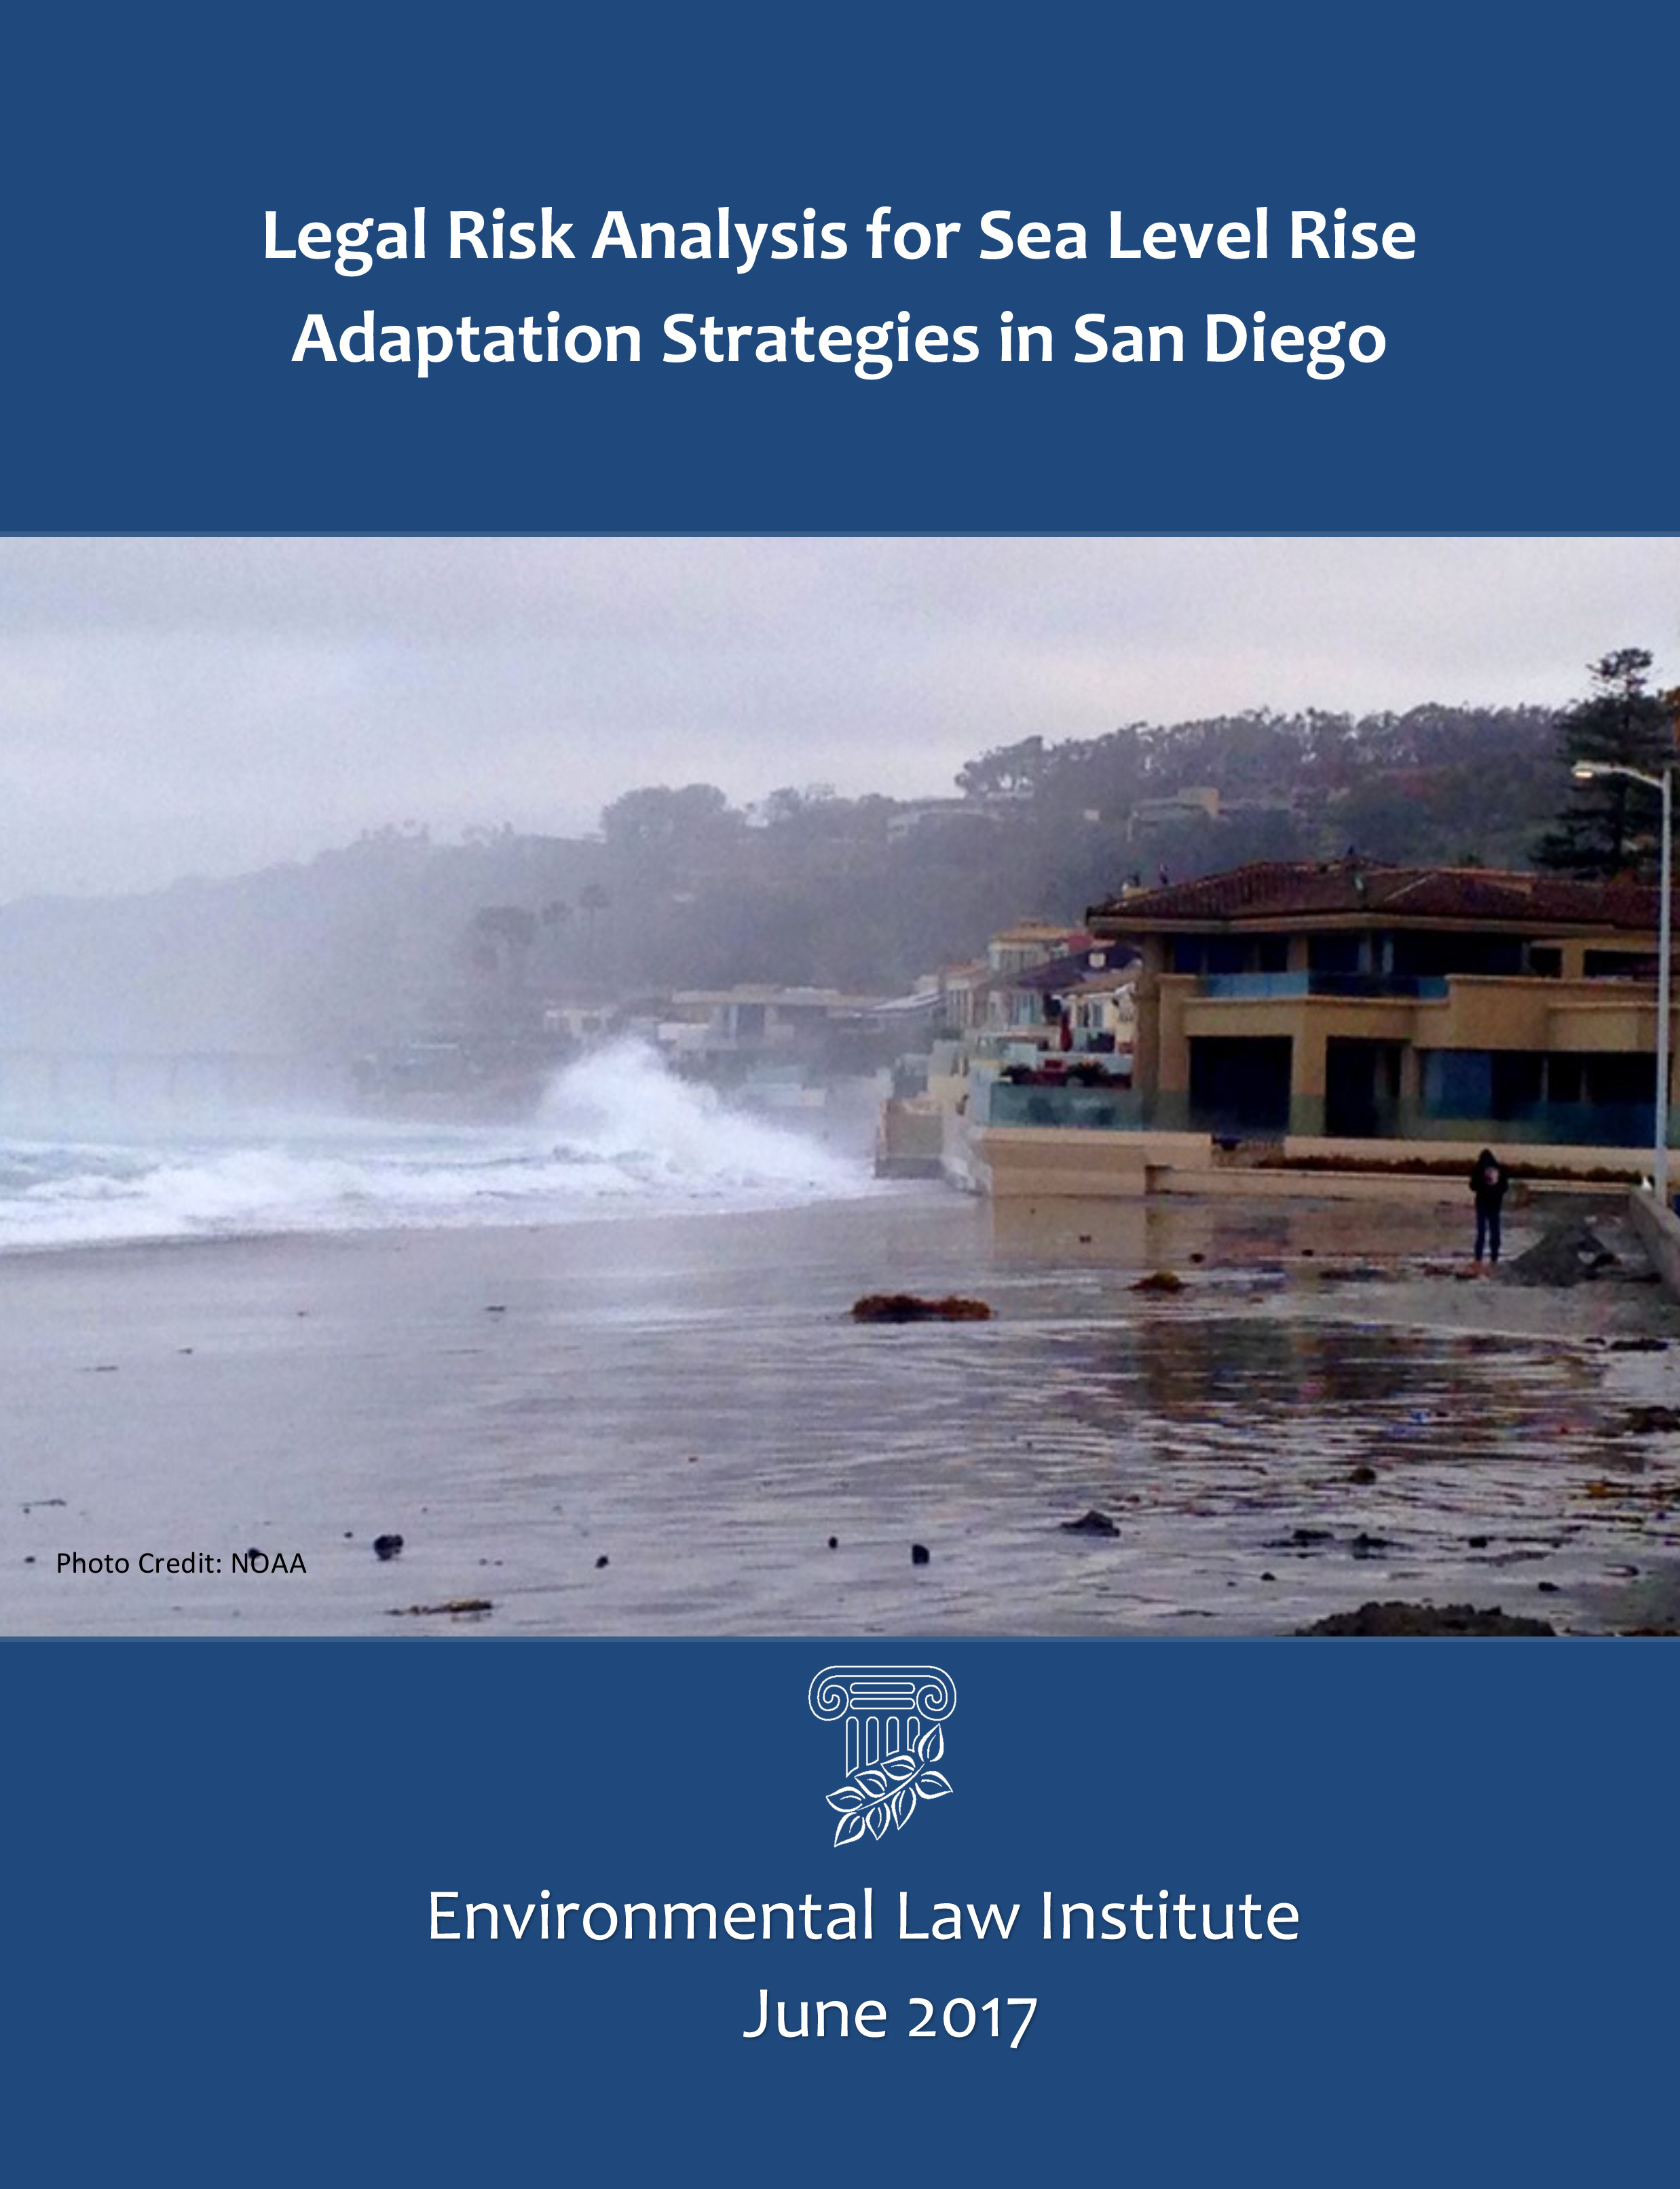 Legal Risk Analysis for Sea Level Rise Adaptation Strategies in San Diego